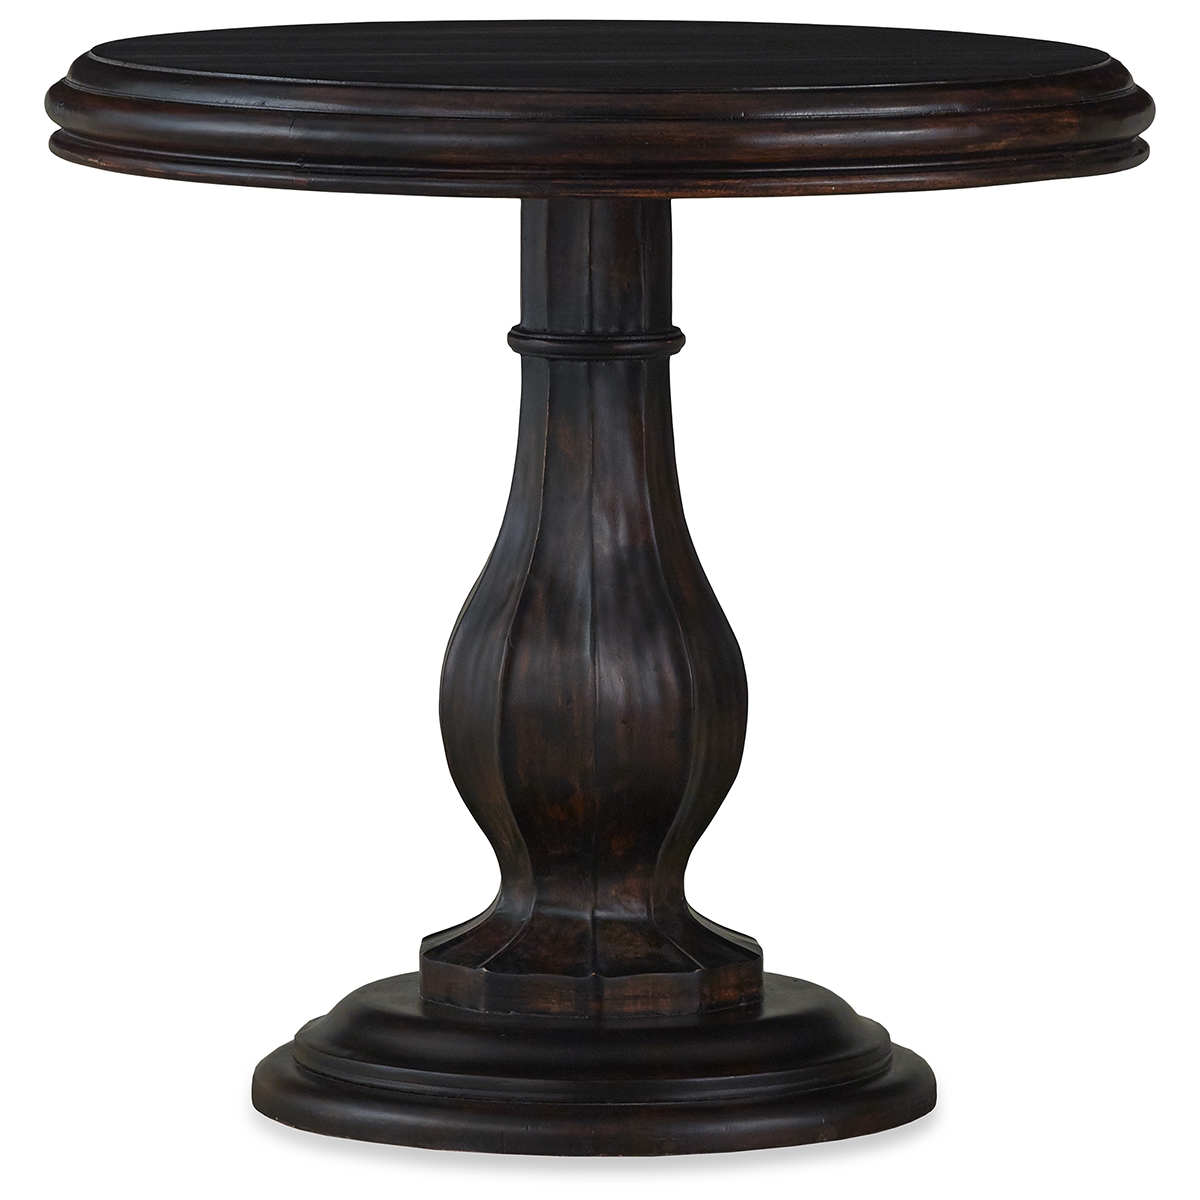 french quarter vintage black side table round pedestal accent vdk mahogany larger email friend pub style dining set apothecary coffee pottery barn small slim bedside target high